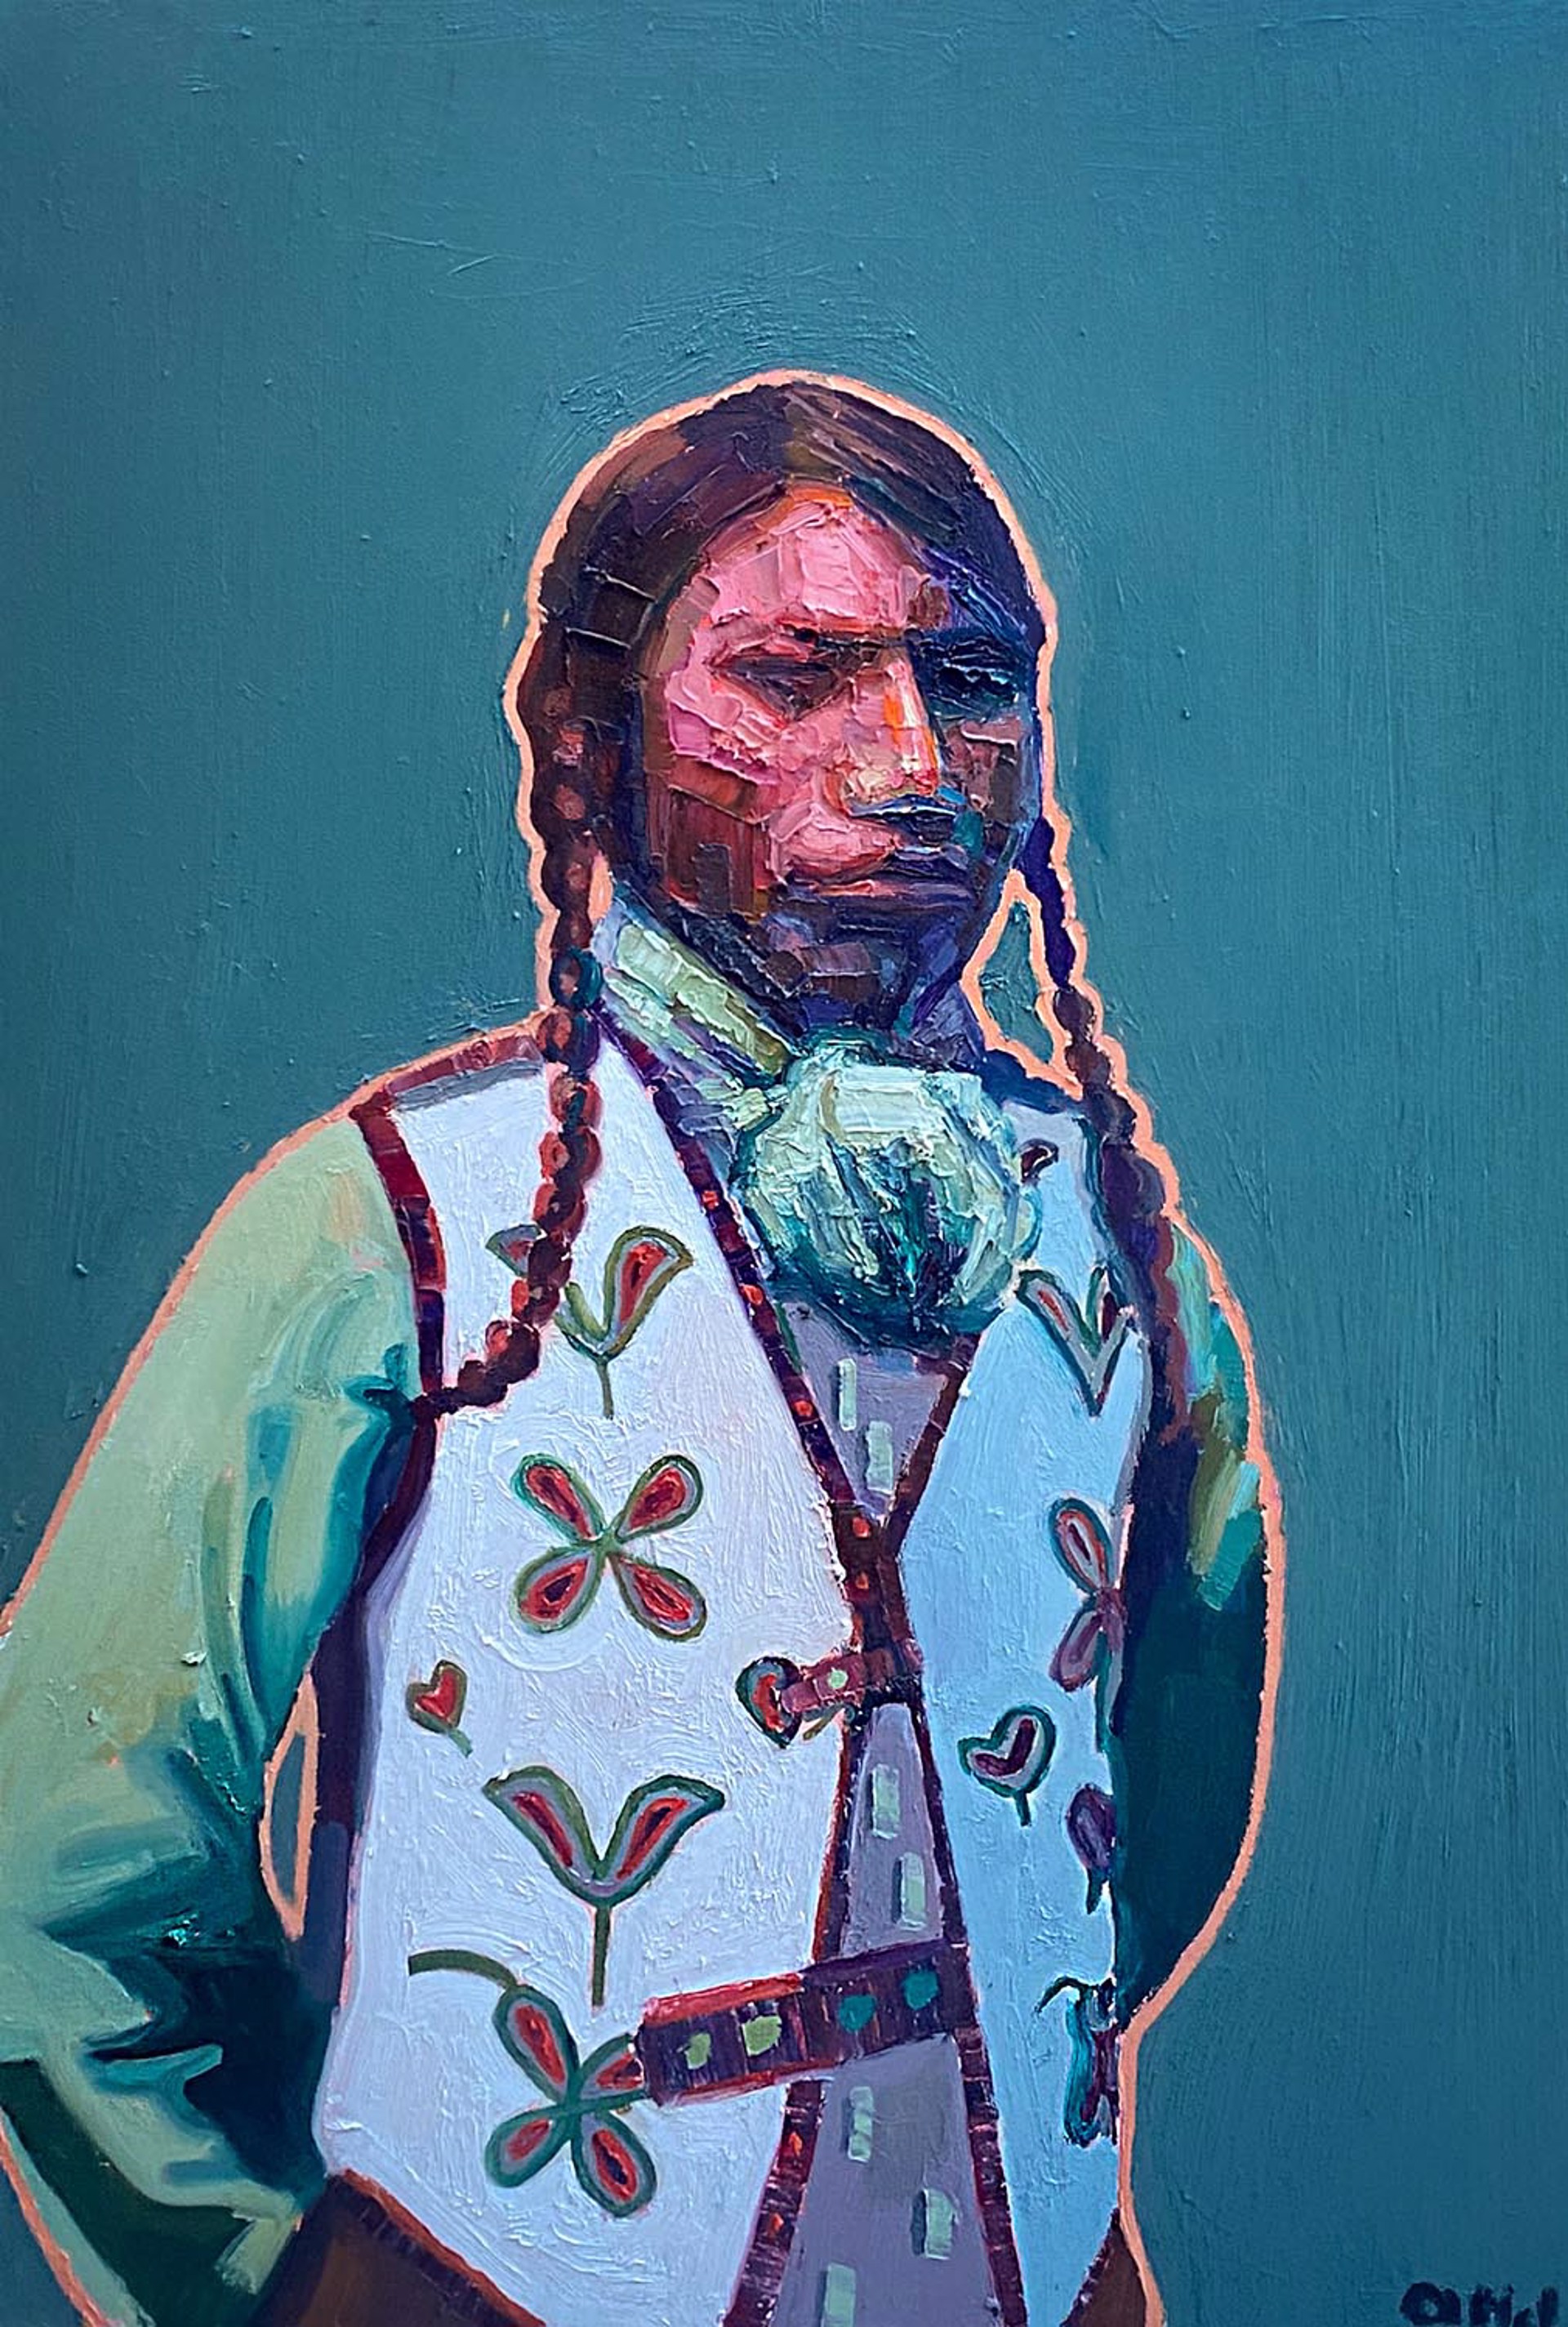 Original Oil Painting By Aaron Hazel Featuring A Portrait Of A Native Figure Over Teal Background